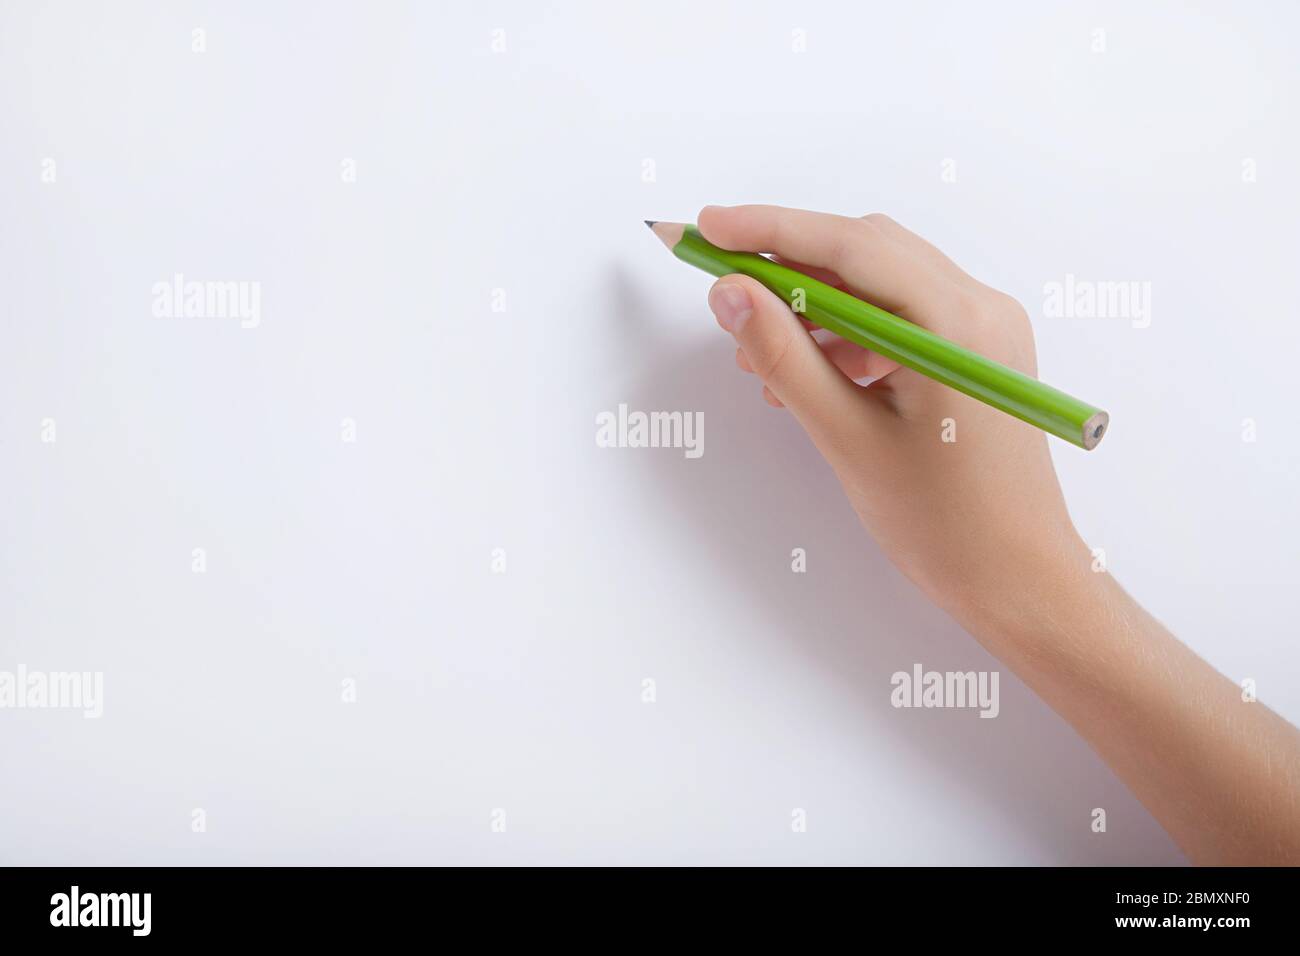 The child's hand holding a pencil against a white sheet of paper Stock Photo